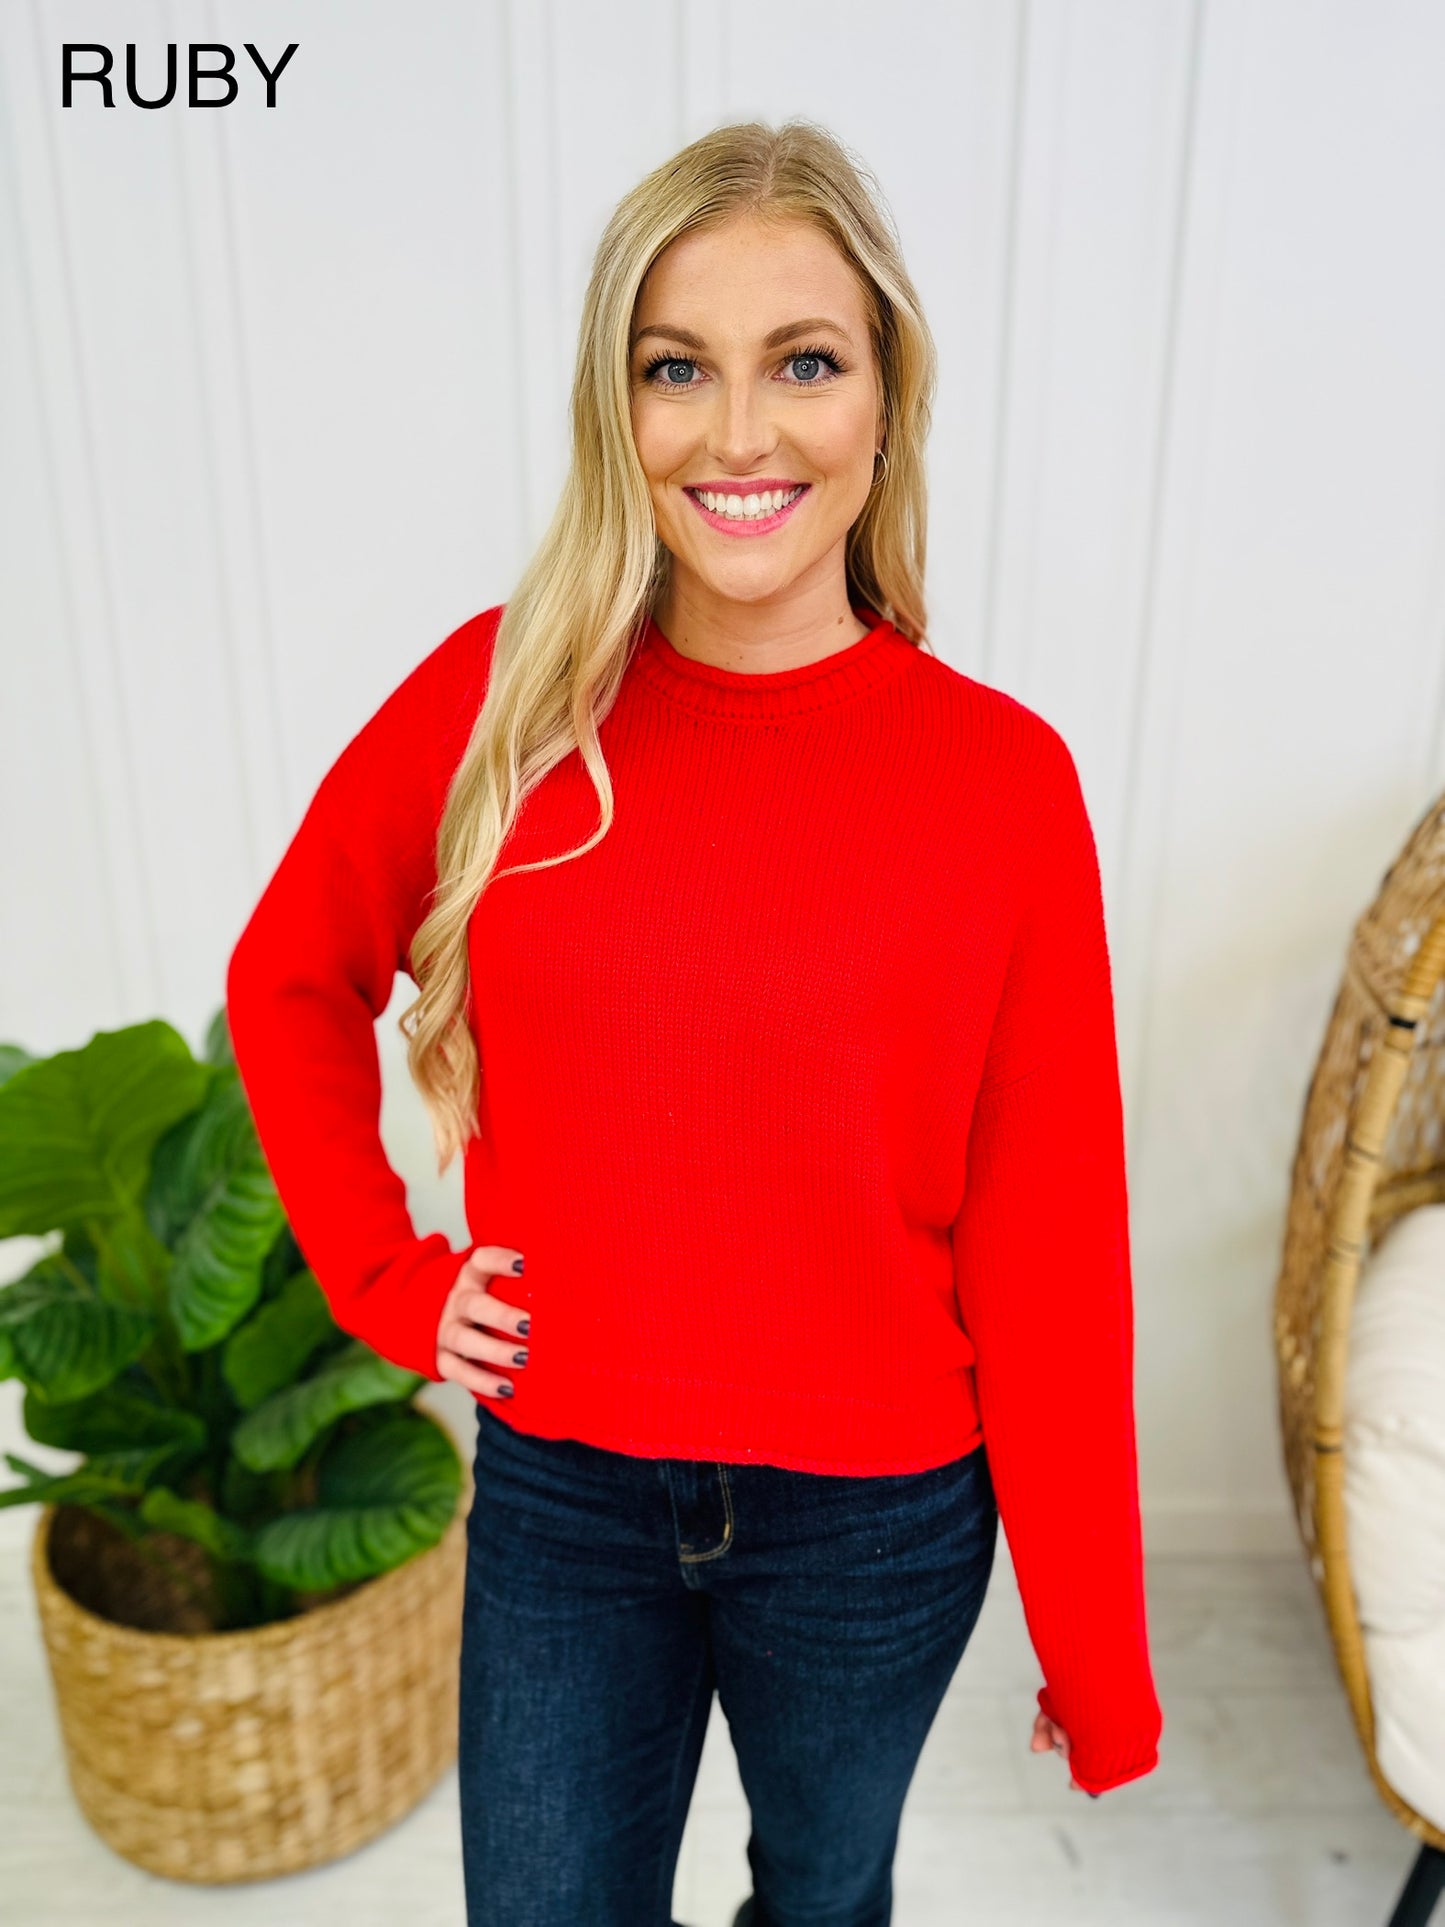 DOORBUSTER! Charming All The Time Sweater- Multiple Colors!